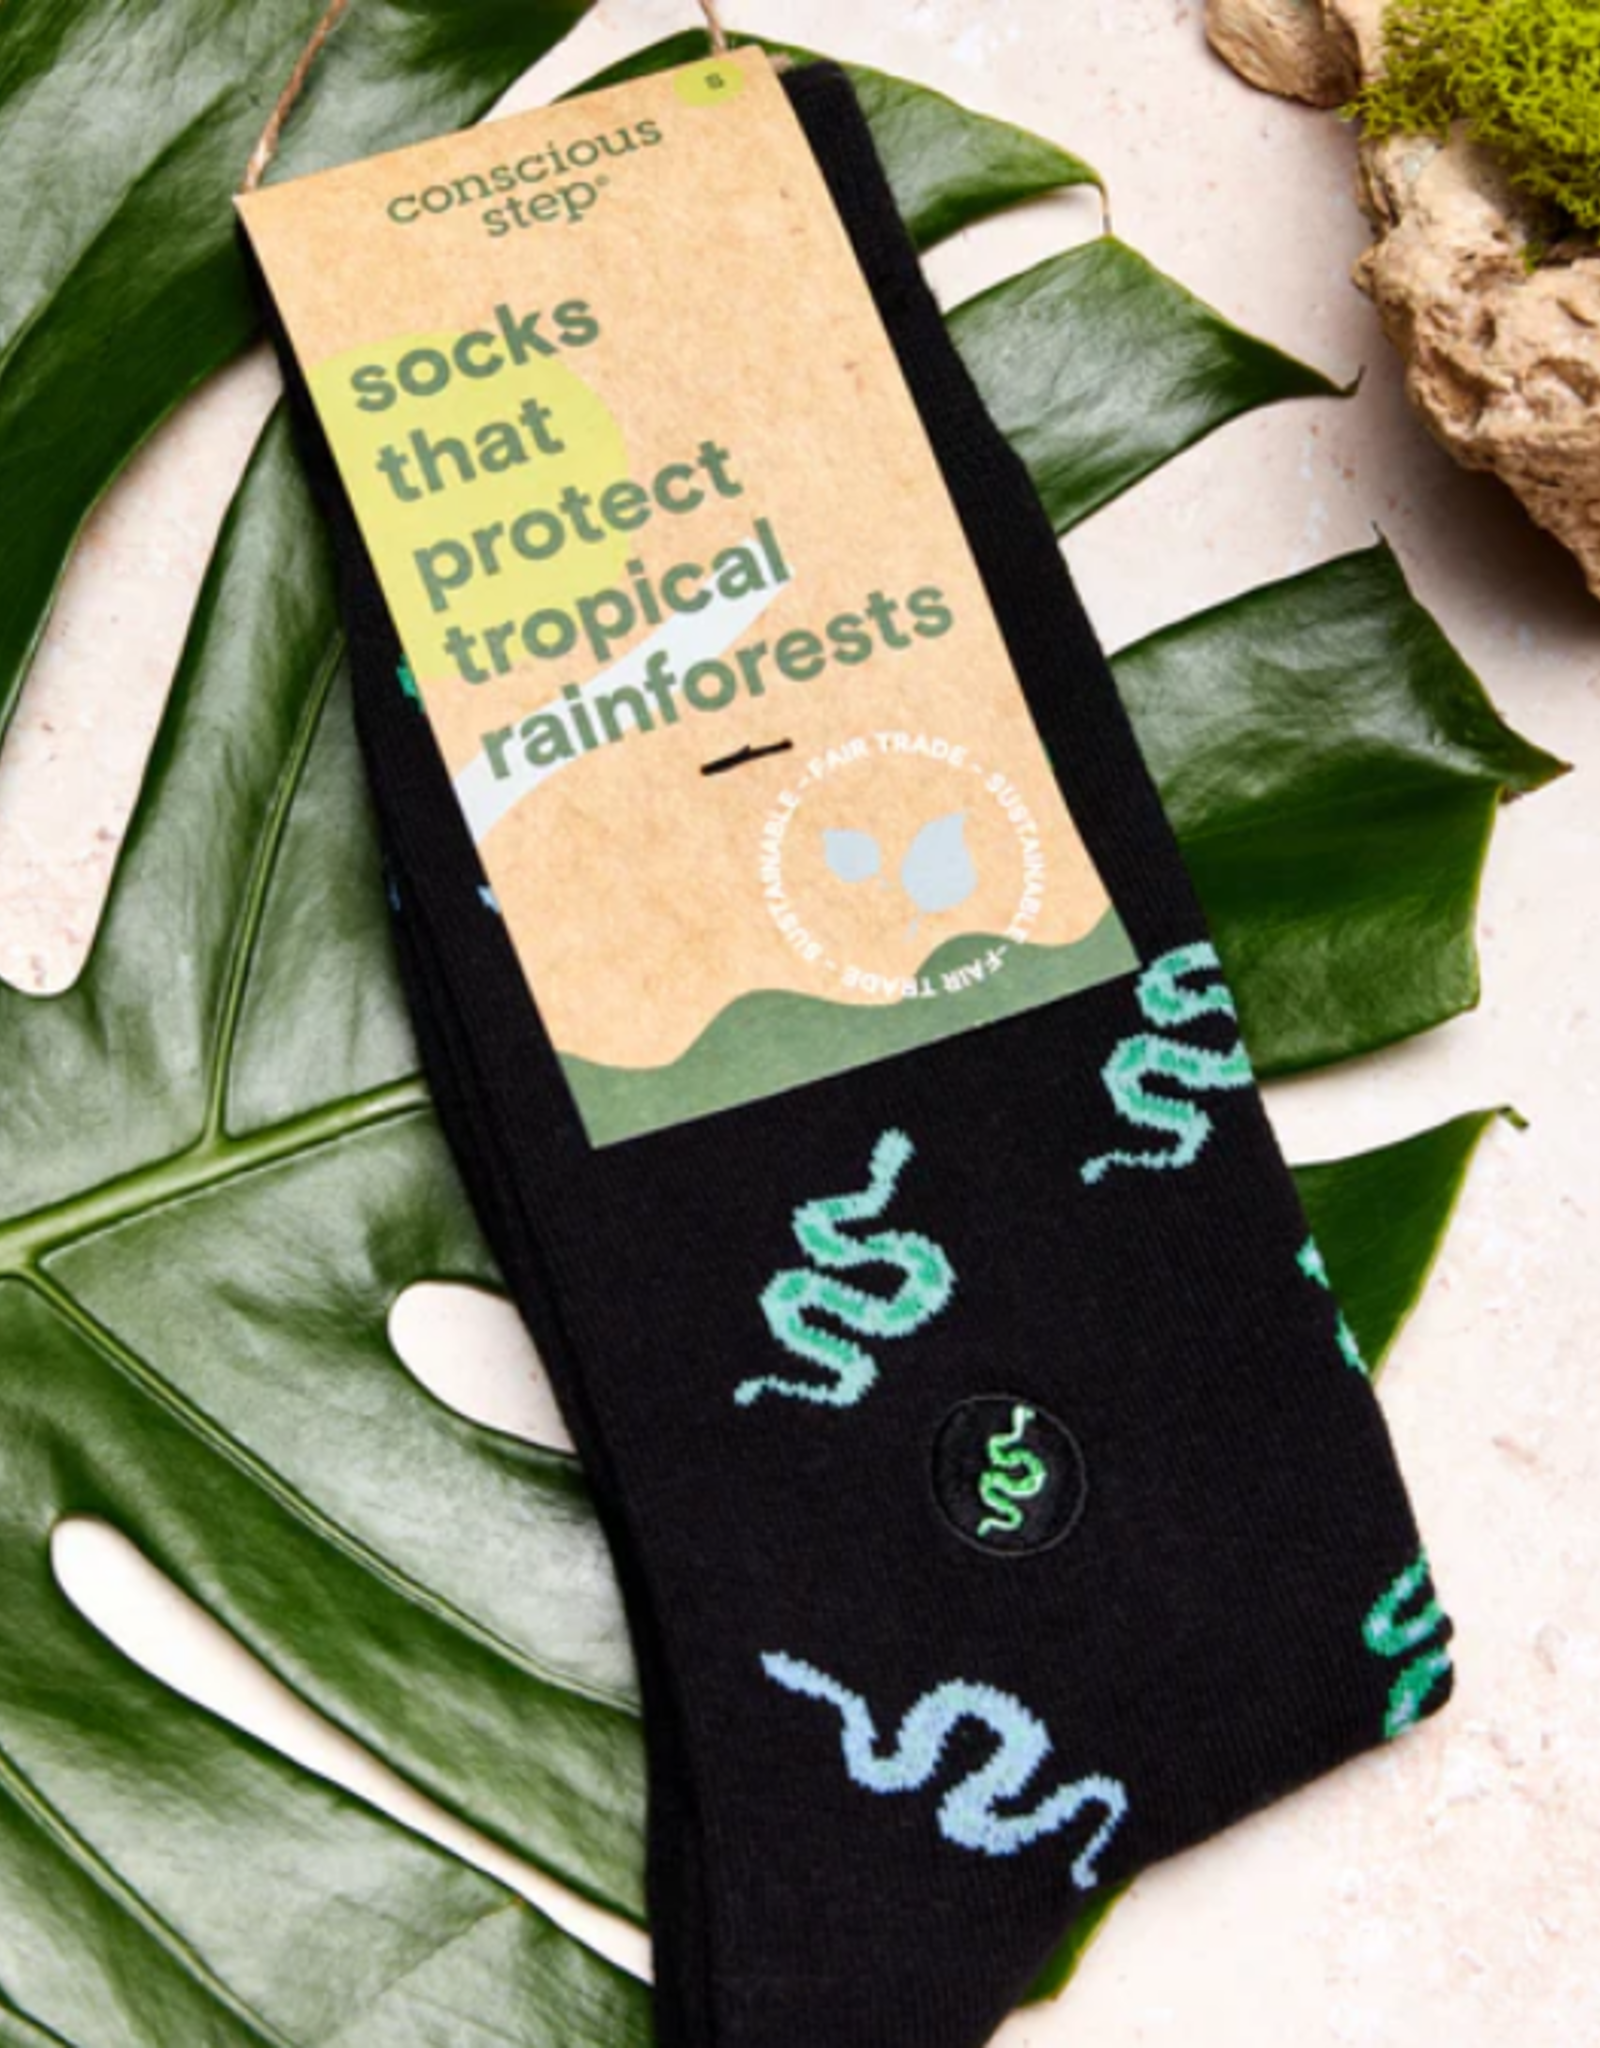 Conscious Step Socks that Protect Tropical Rainforests (Snakes)